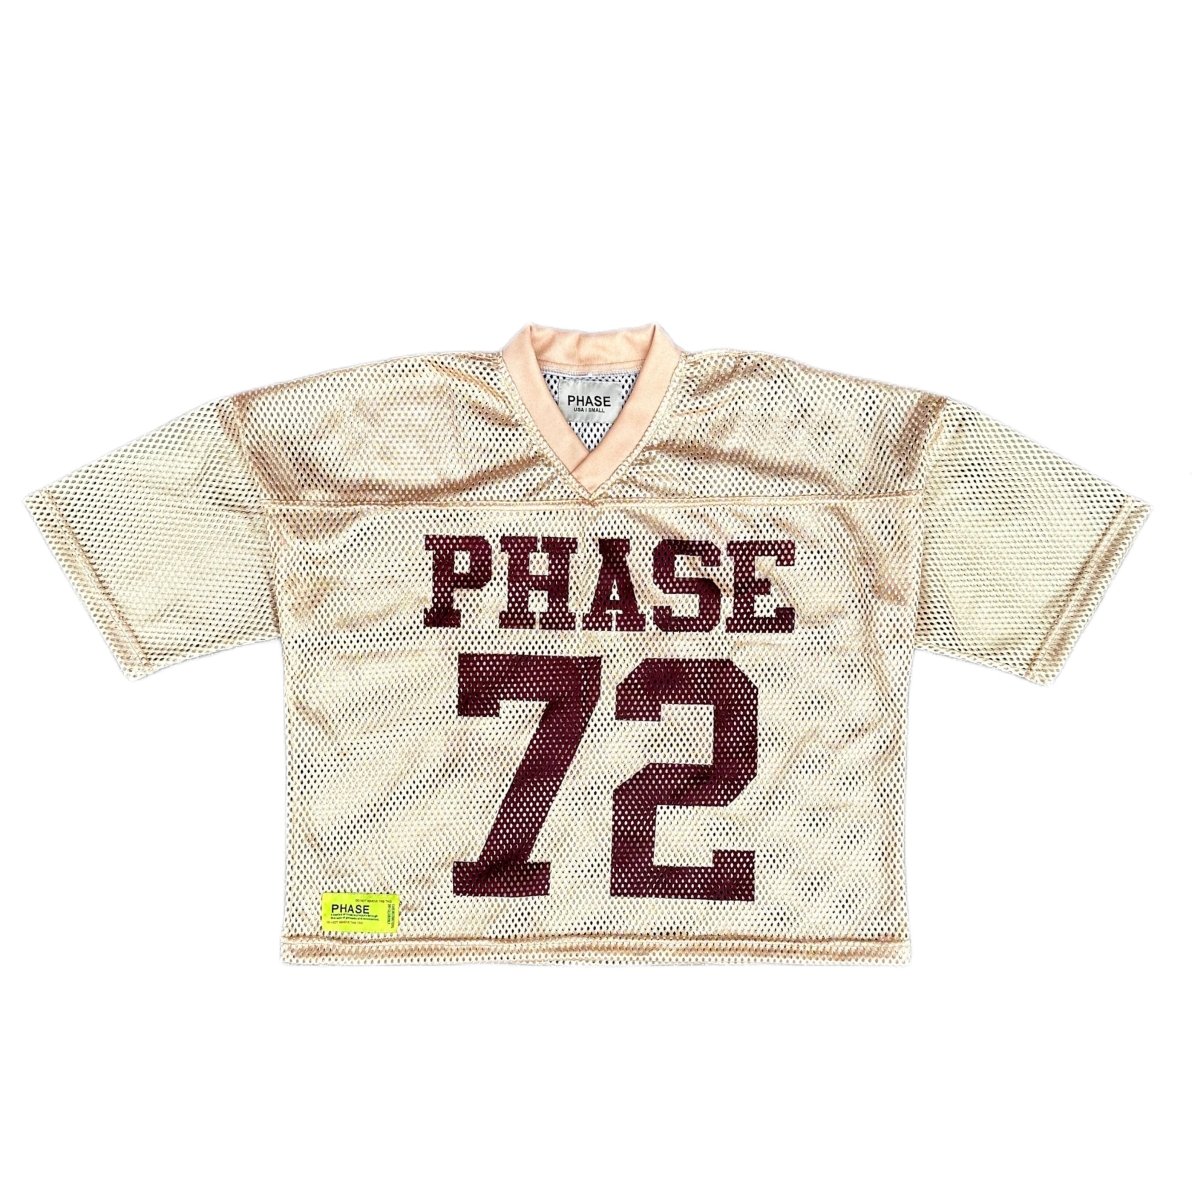 Cropped Mesh Jersey - PHASE